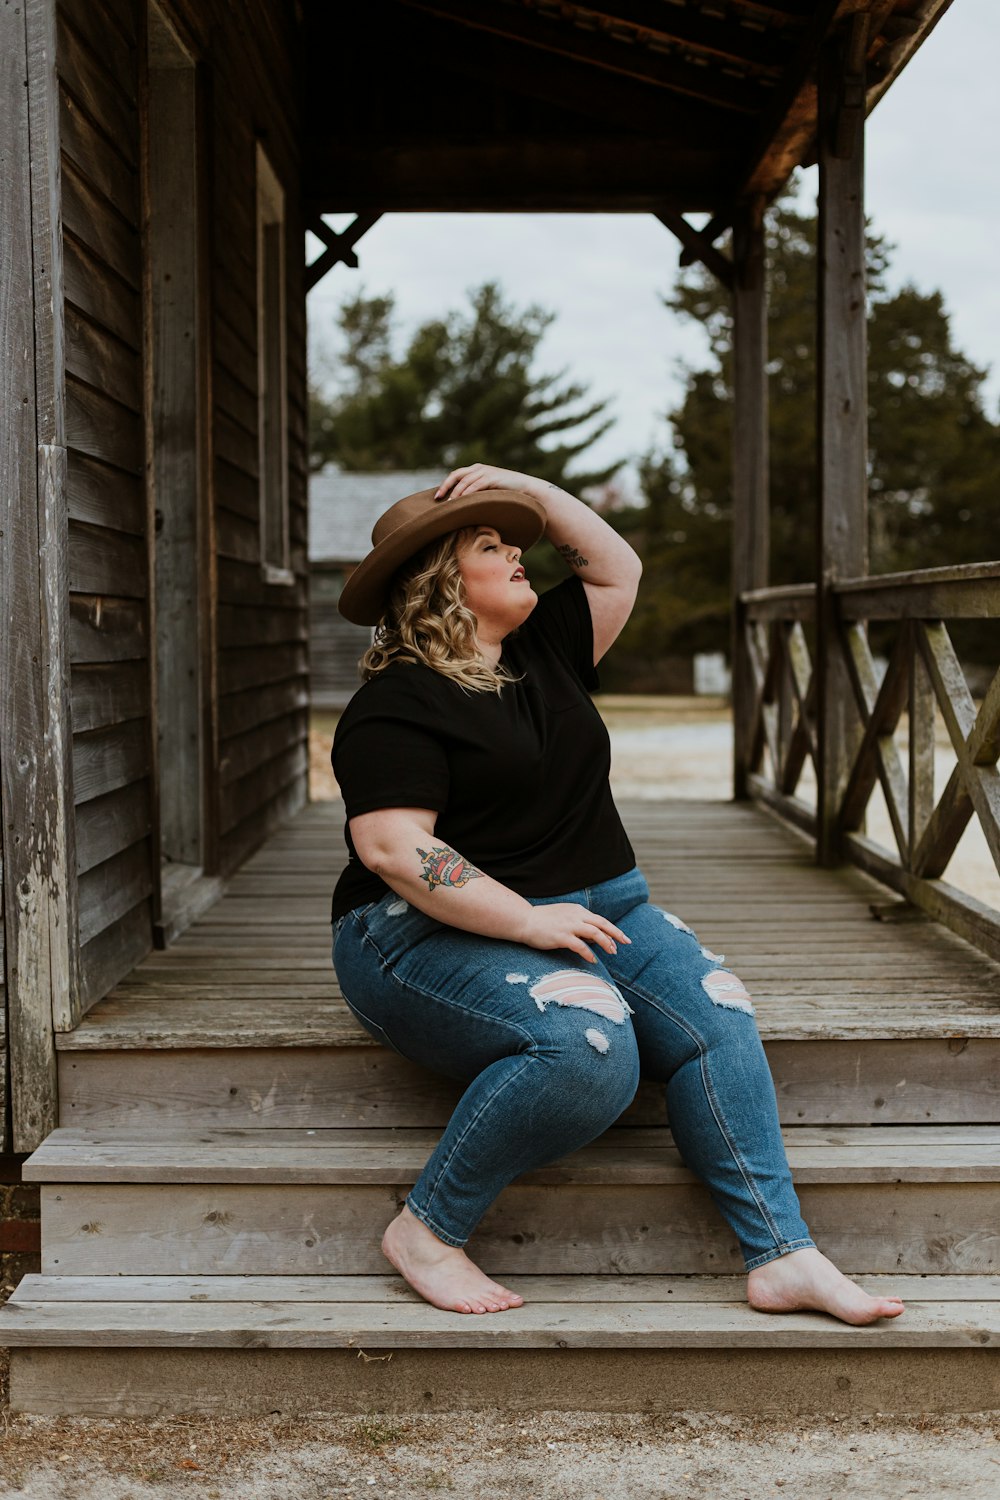 woman in black t-shirt and blue denim jeans sitting on wooden bridge photo  – Free Body positive Image on Unsplash